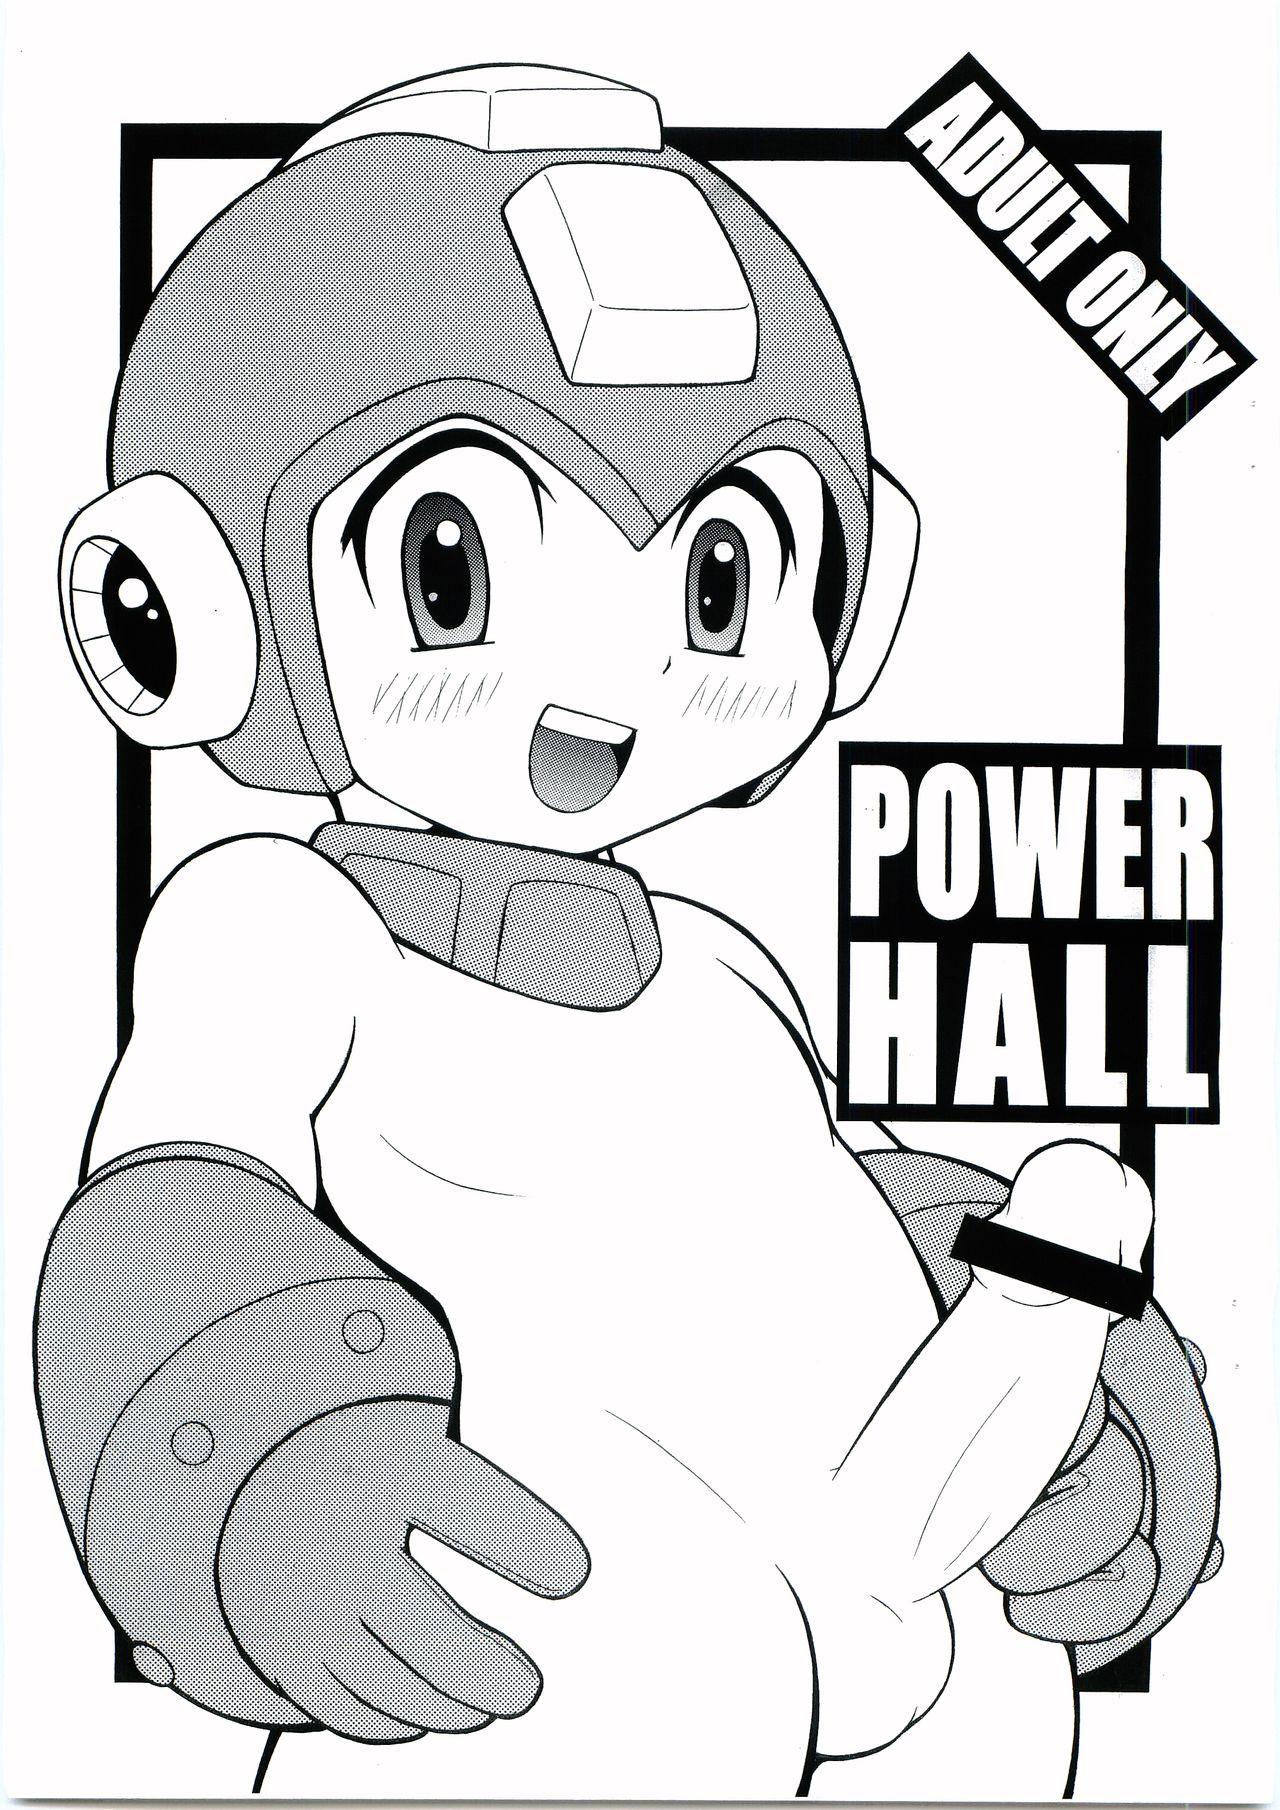 18yearsold POWER HALL - Megaman Yanks Featured - Picture 1